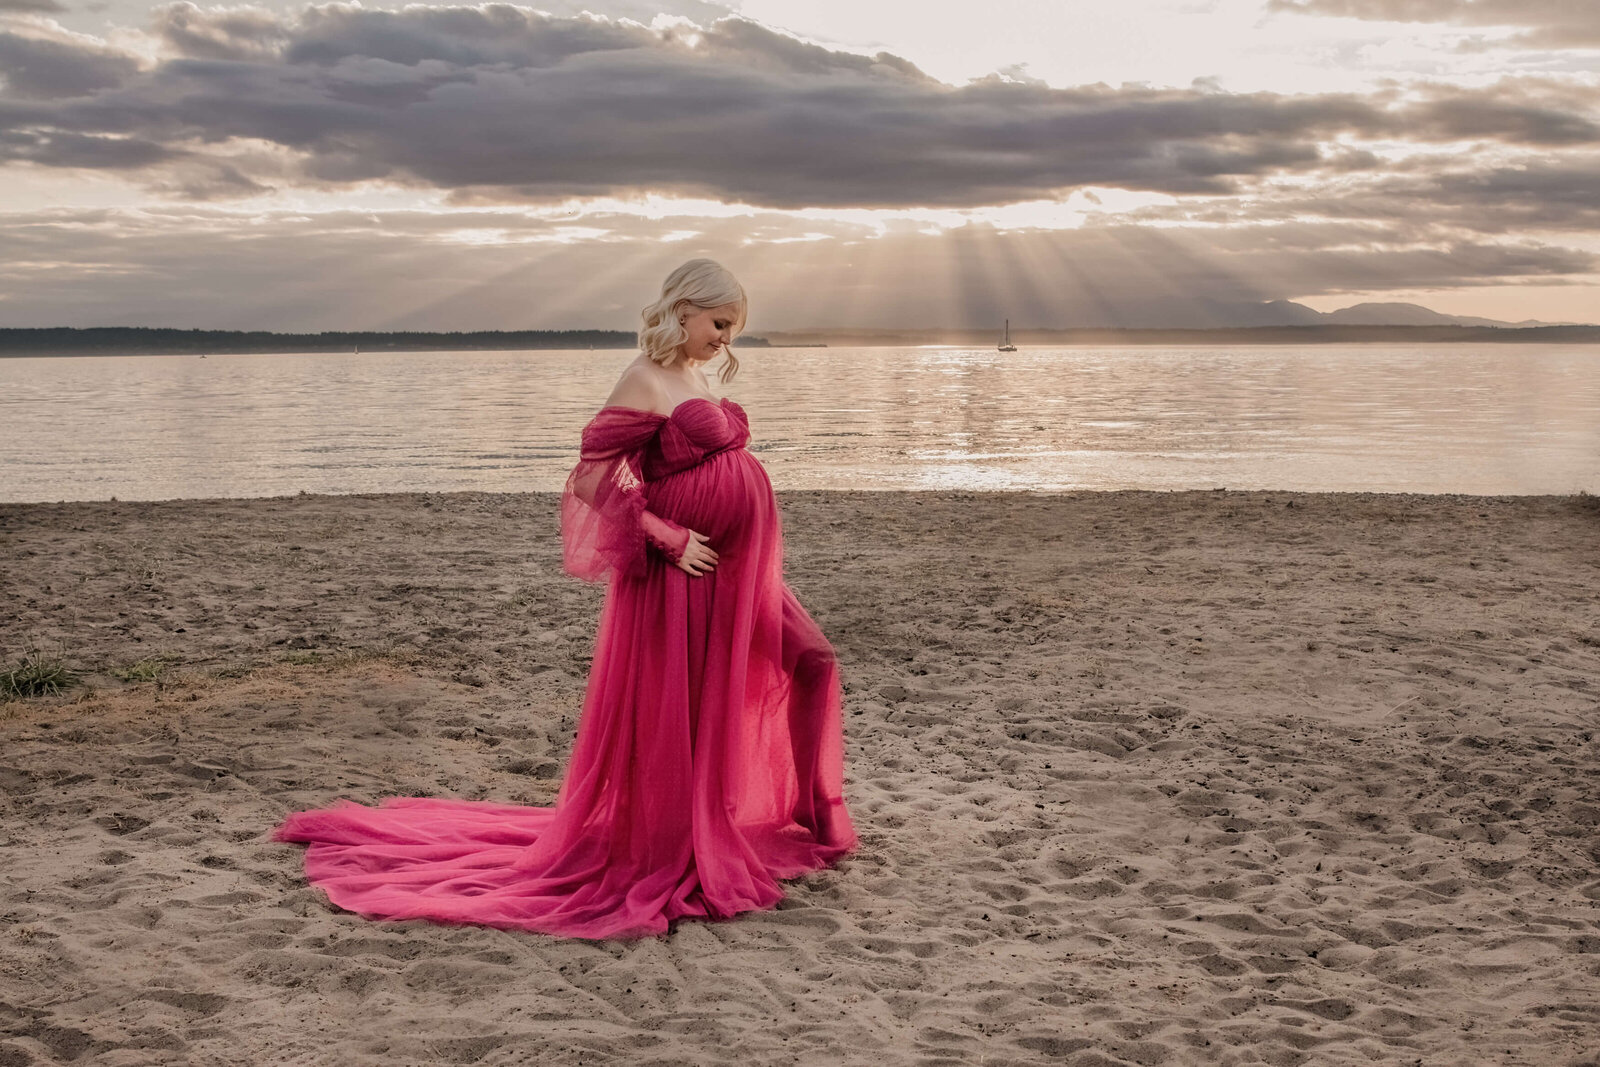 Pregnant woman in sheer dress on beach at sunset.